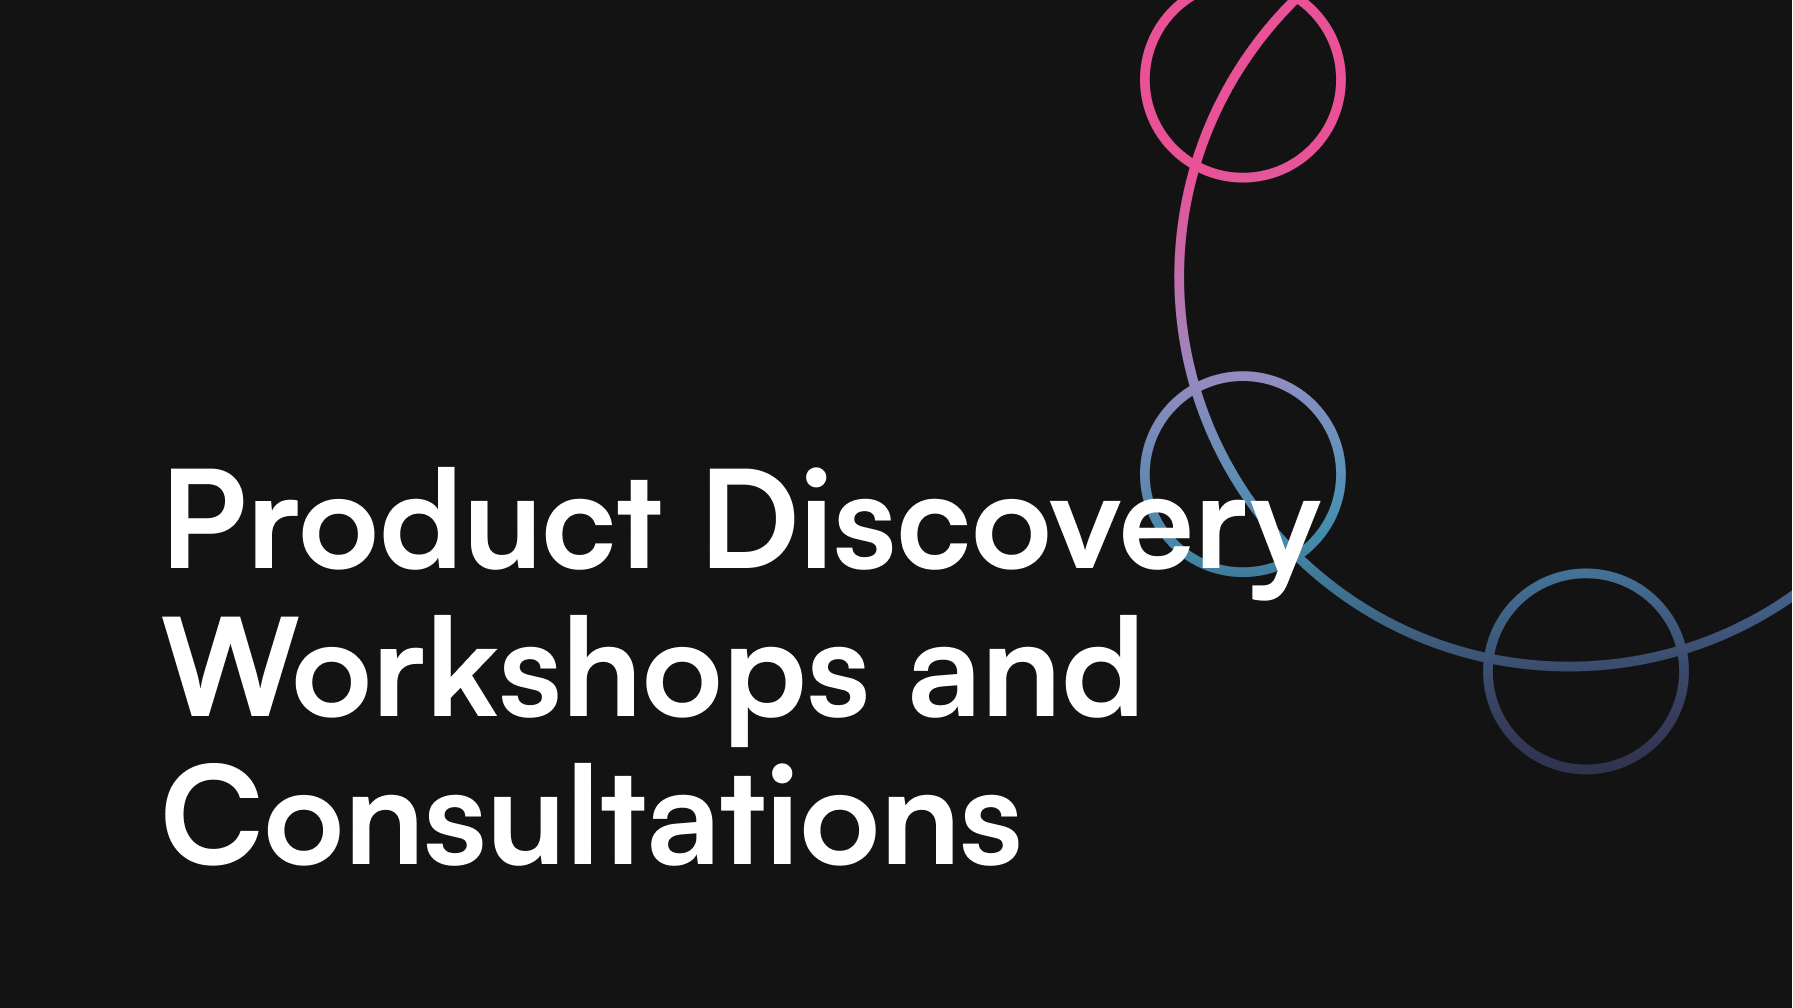 Your quick guide to Product Discovery Workshops and Consultations